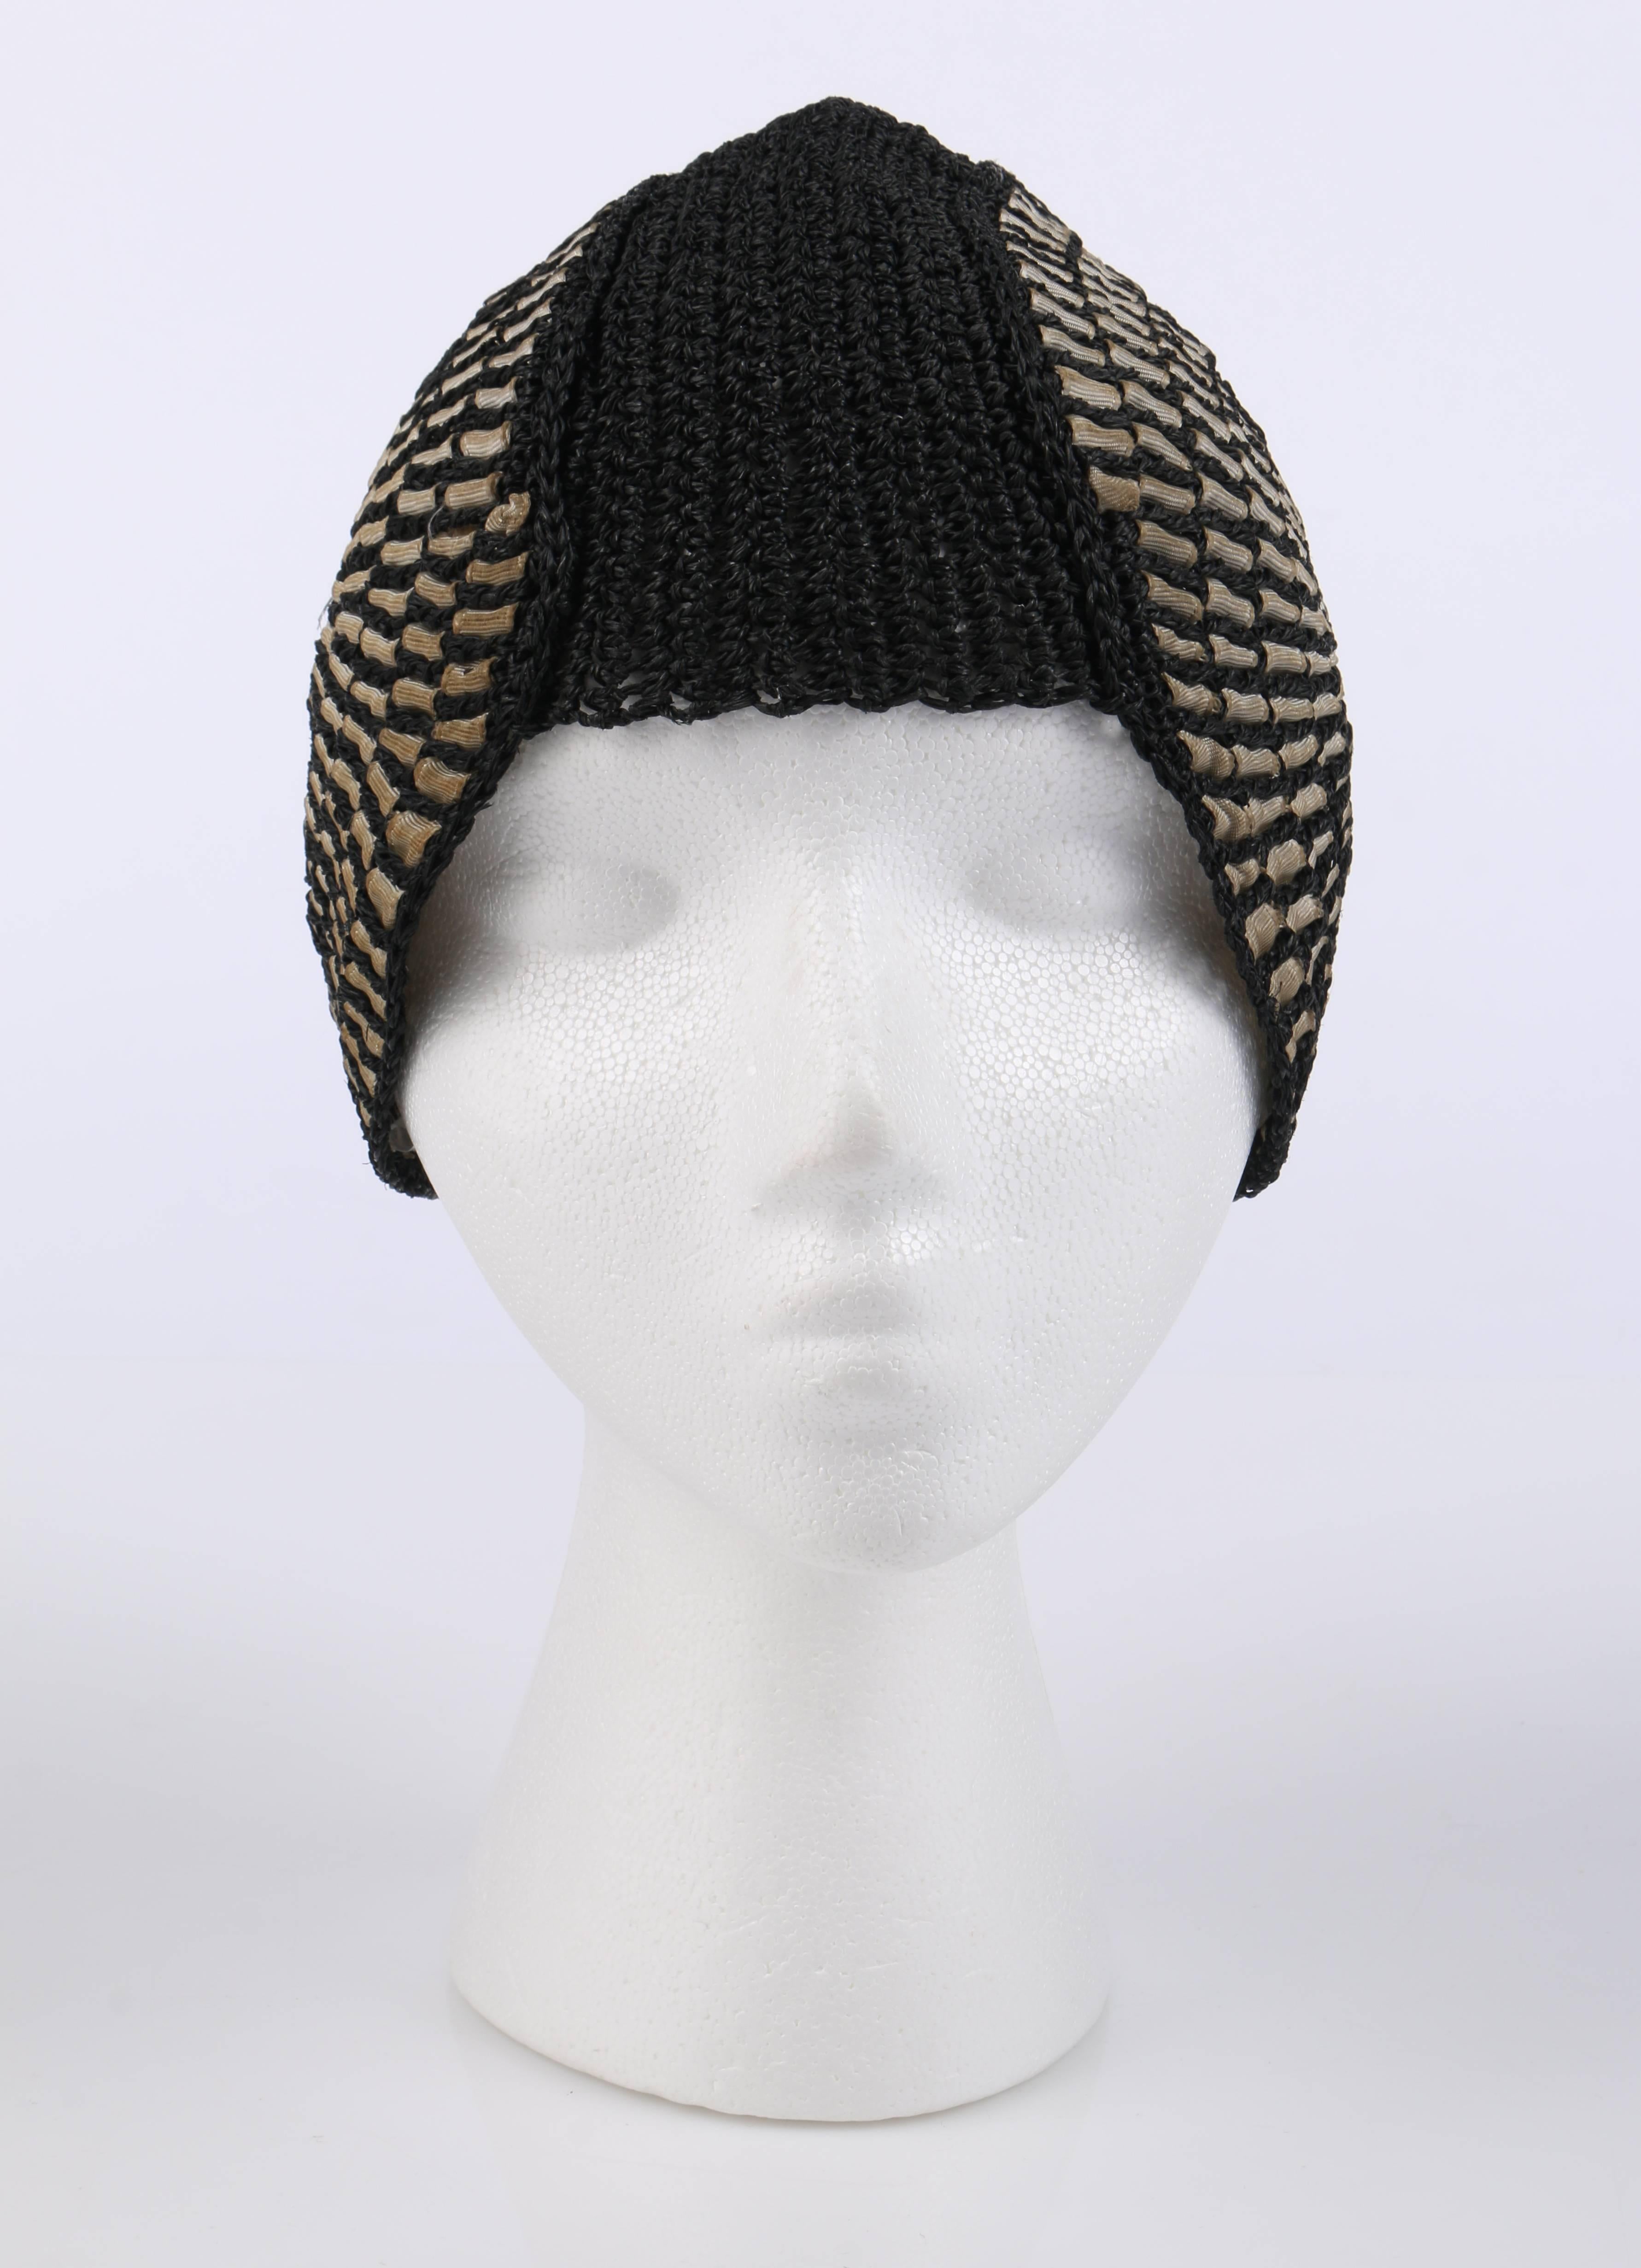 Vintage c.1920's black crocheted straw woven detail Juliet cap cloche hat. Black crocheted straw body. Beige grosgrain ribbon woven in a spiral pattern on either temple. Helmet style formed around the head. Unlined. Unmarked Fabric Content: Straw.